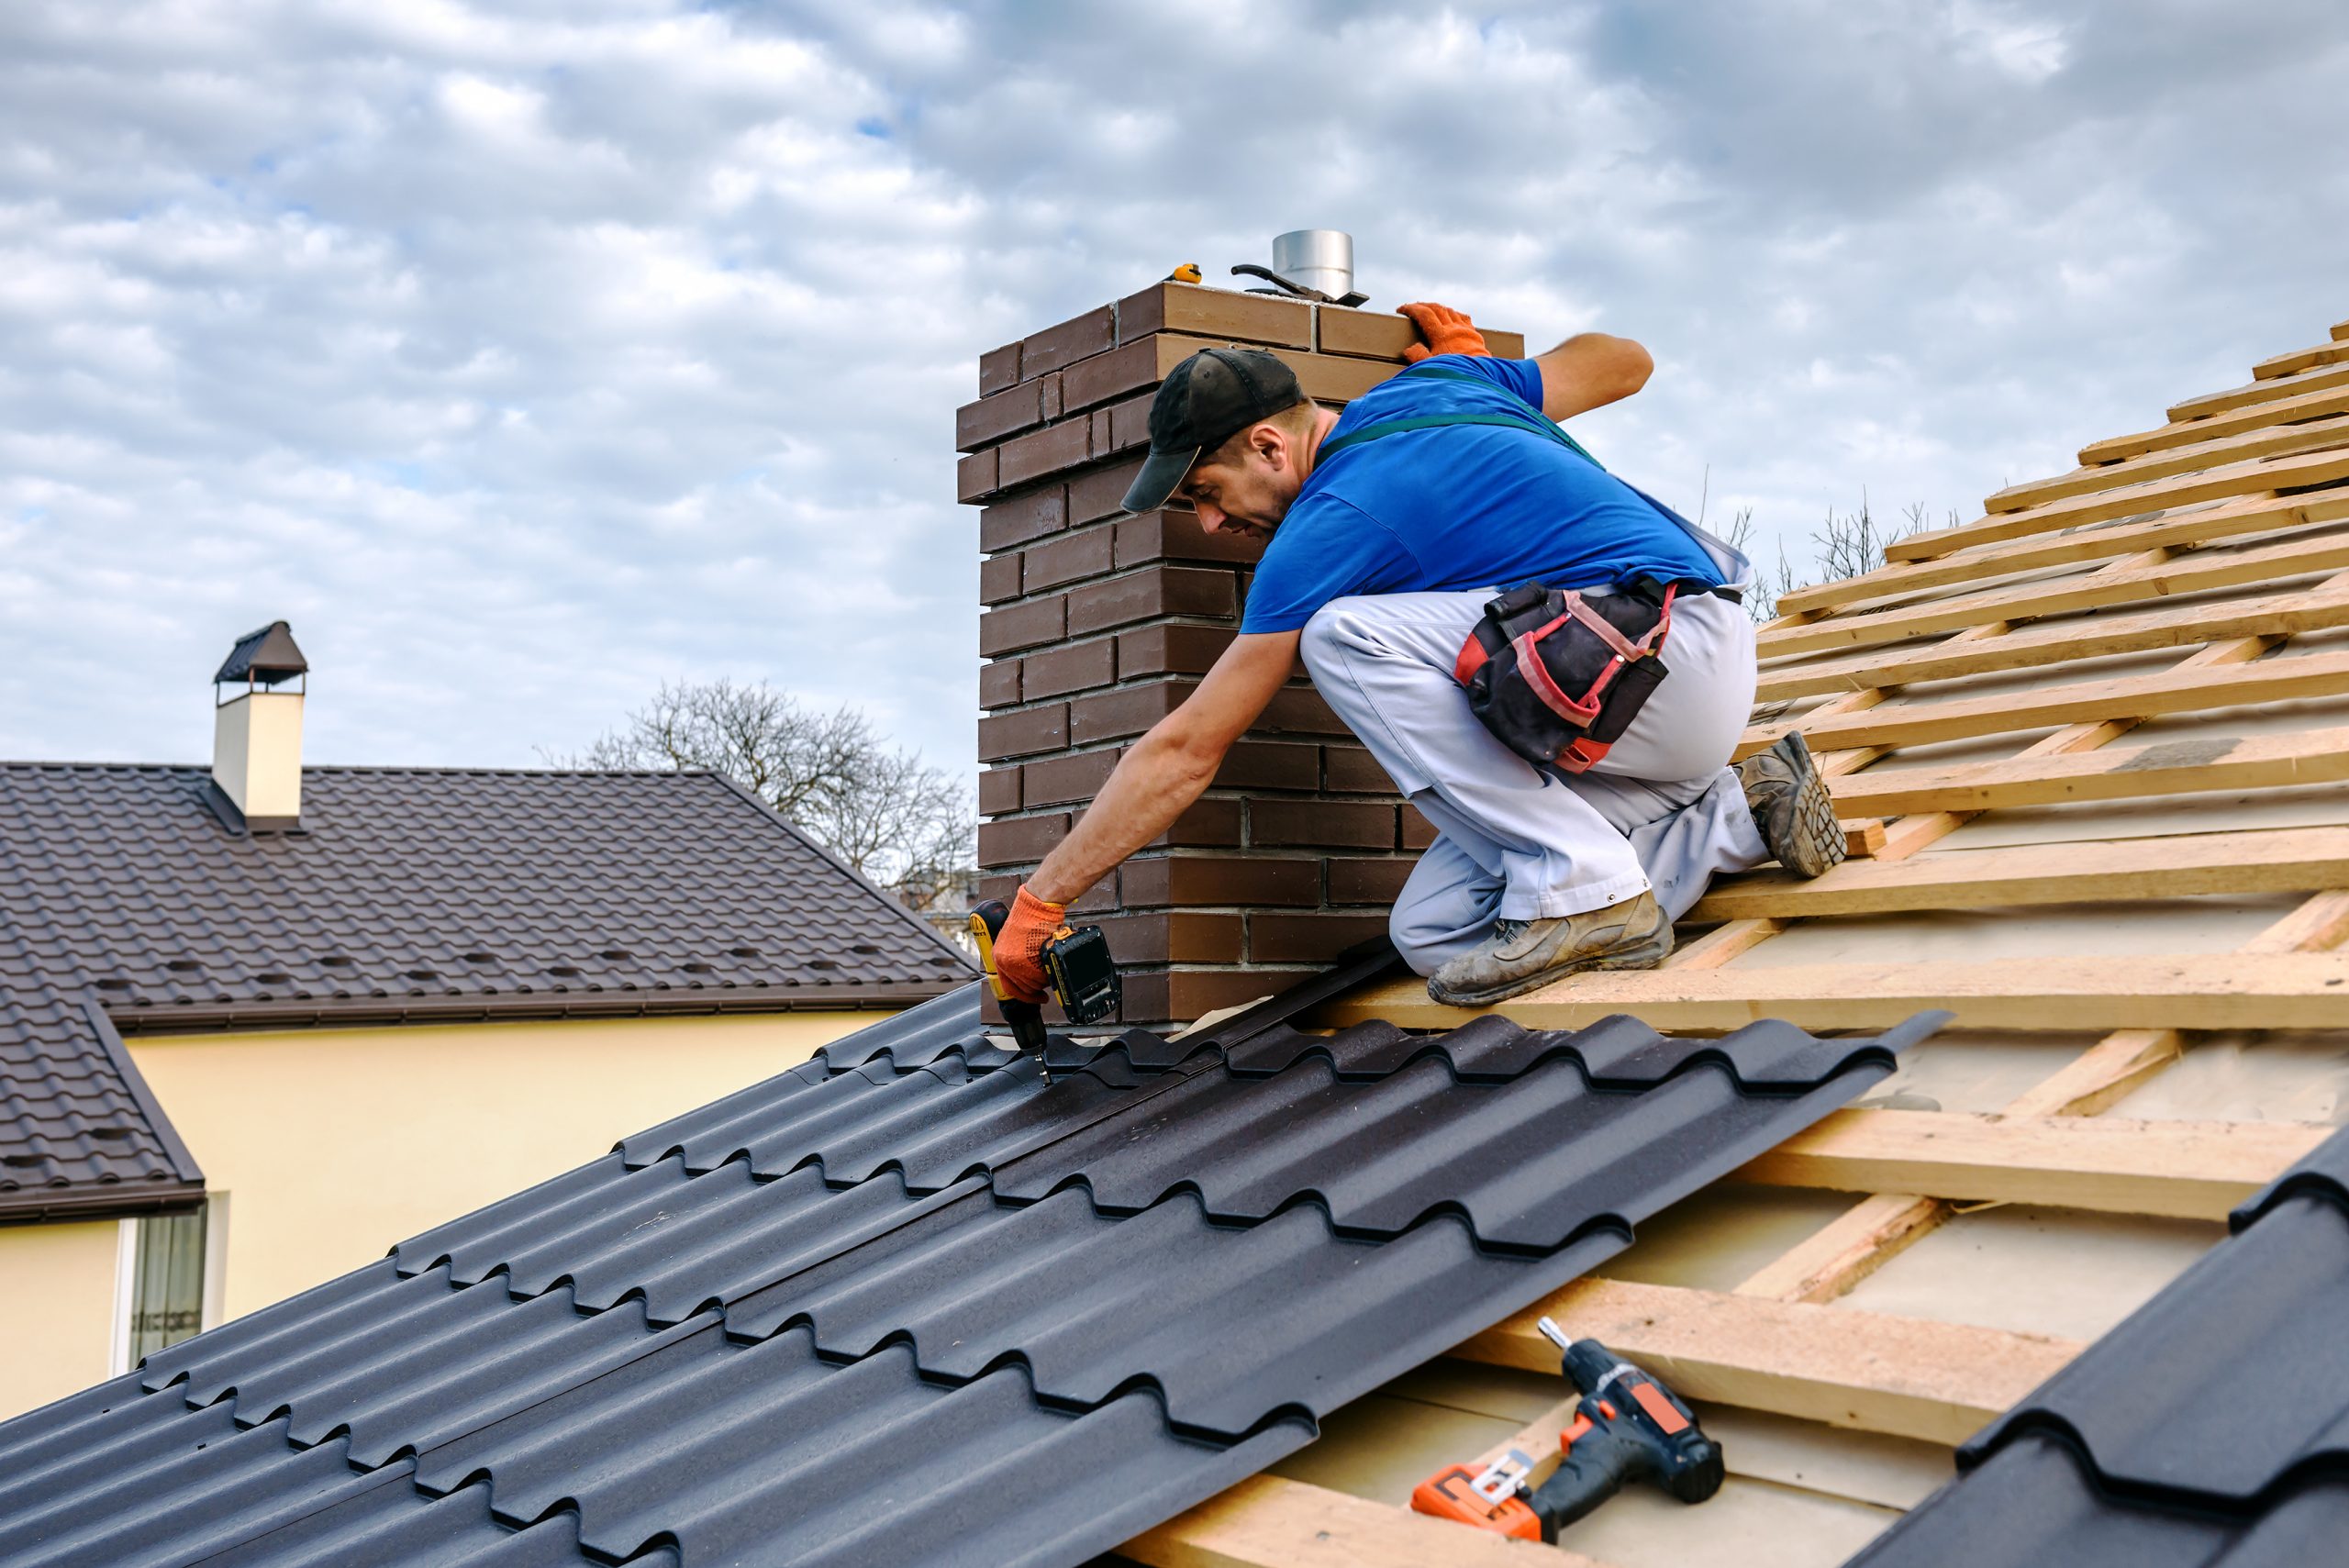 How to Find Residential Roofing Services in Windermere FL?